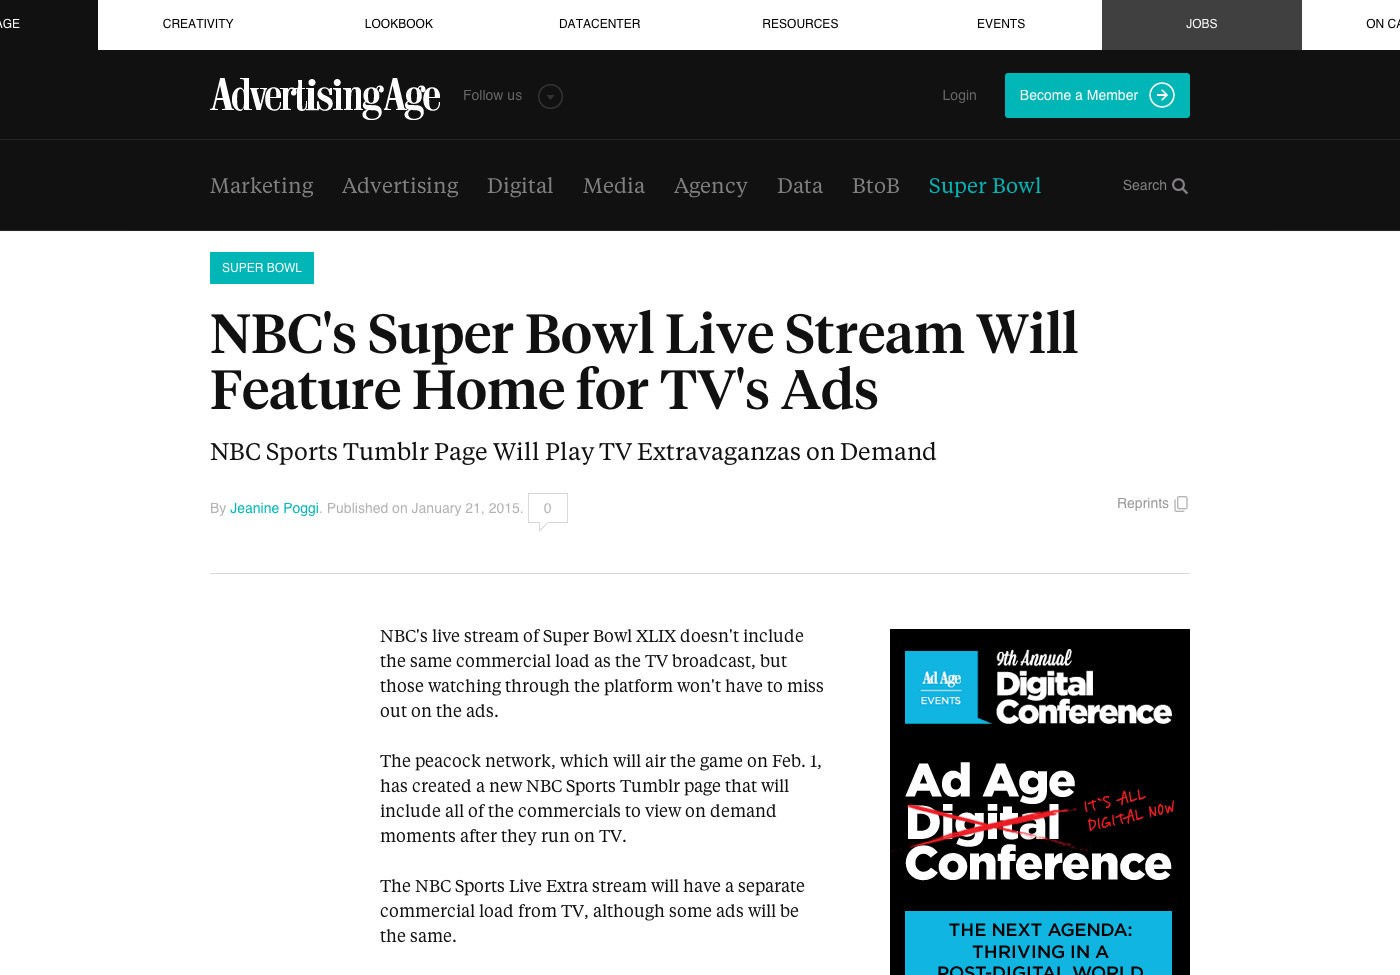 NBC's Super Bowl Live Stream Will Feature Home for TV's Ads